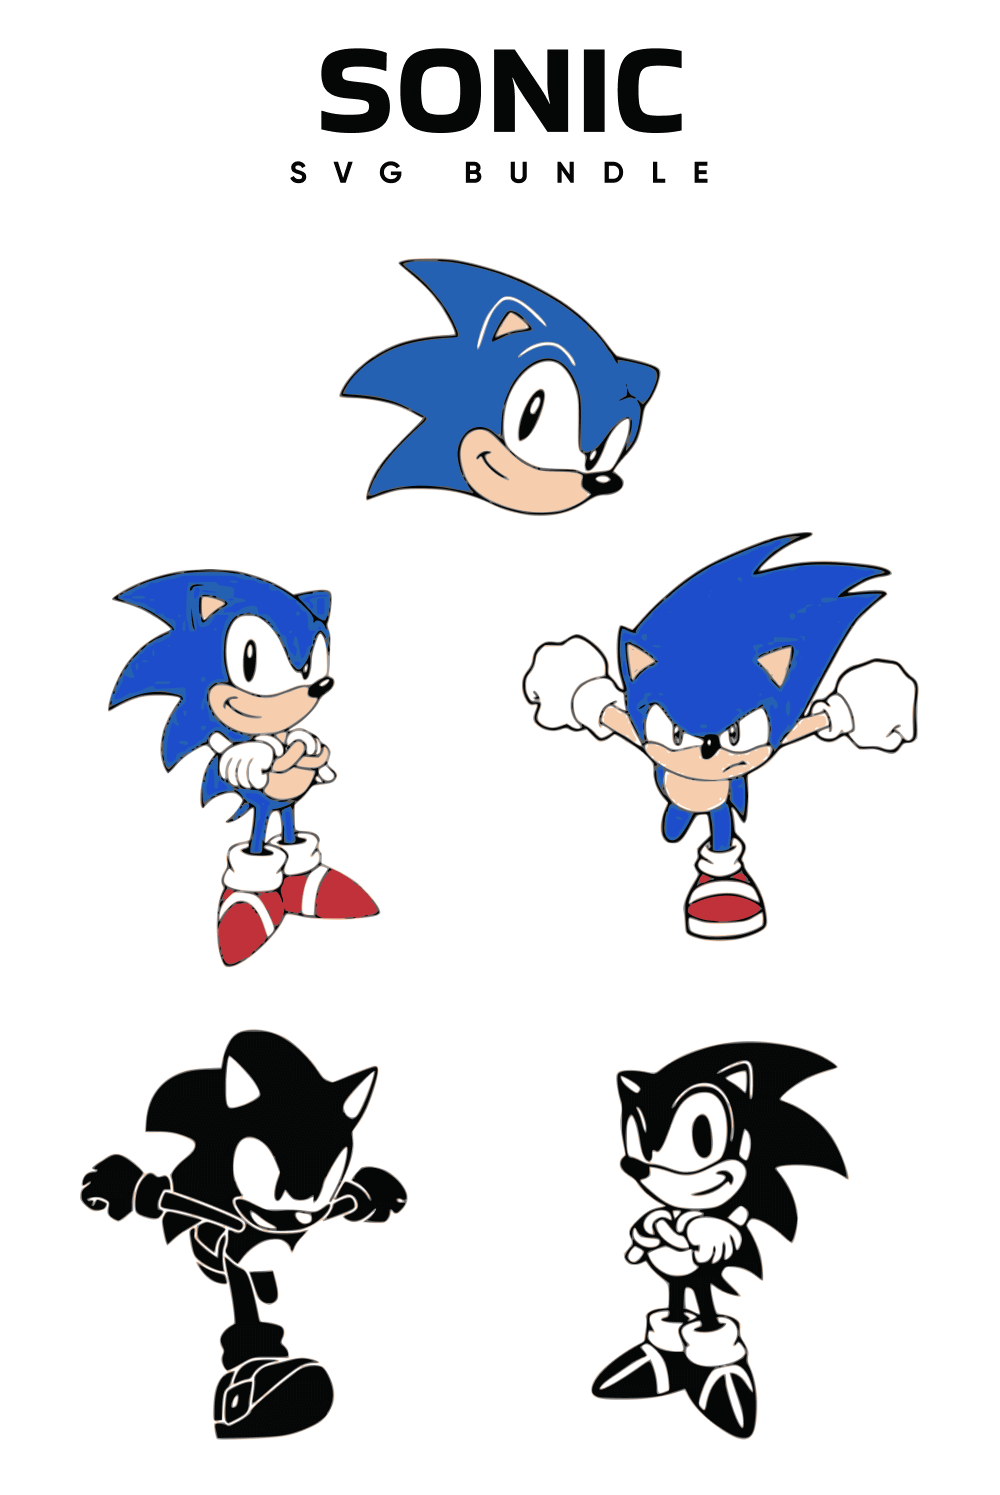 Sonic in color and black and white.